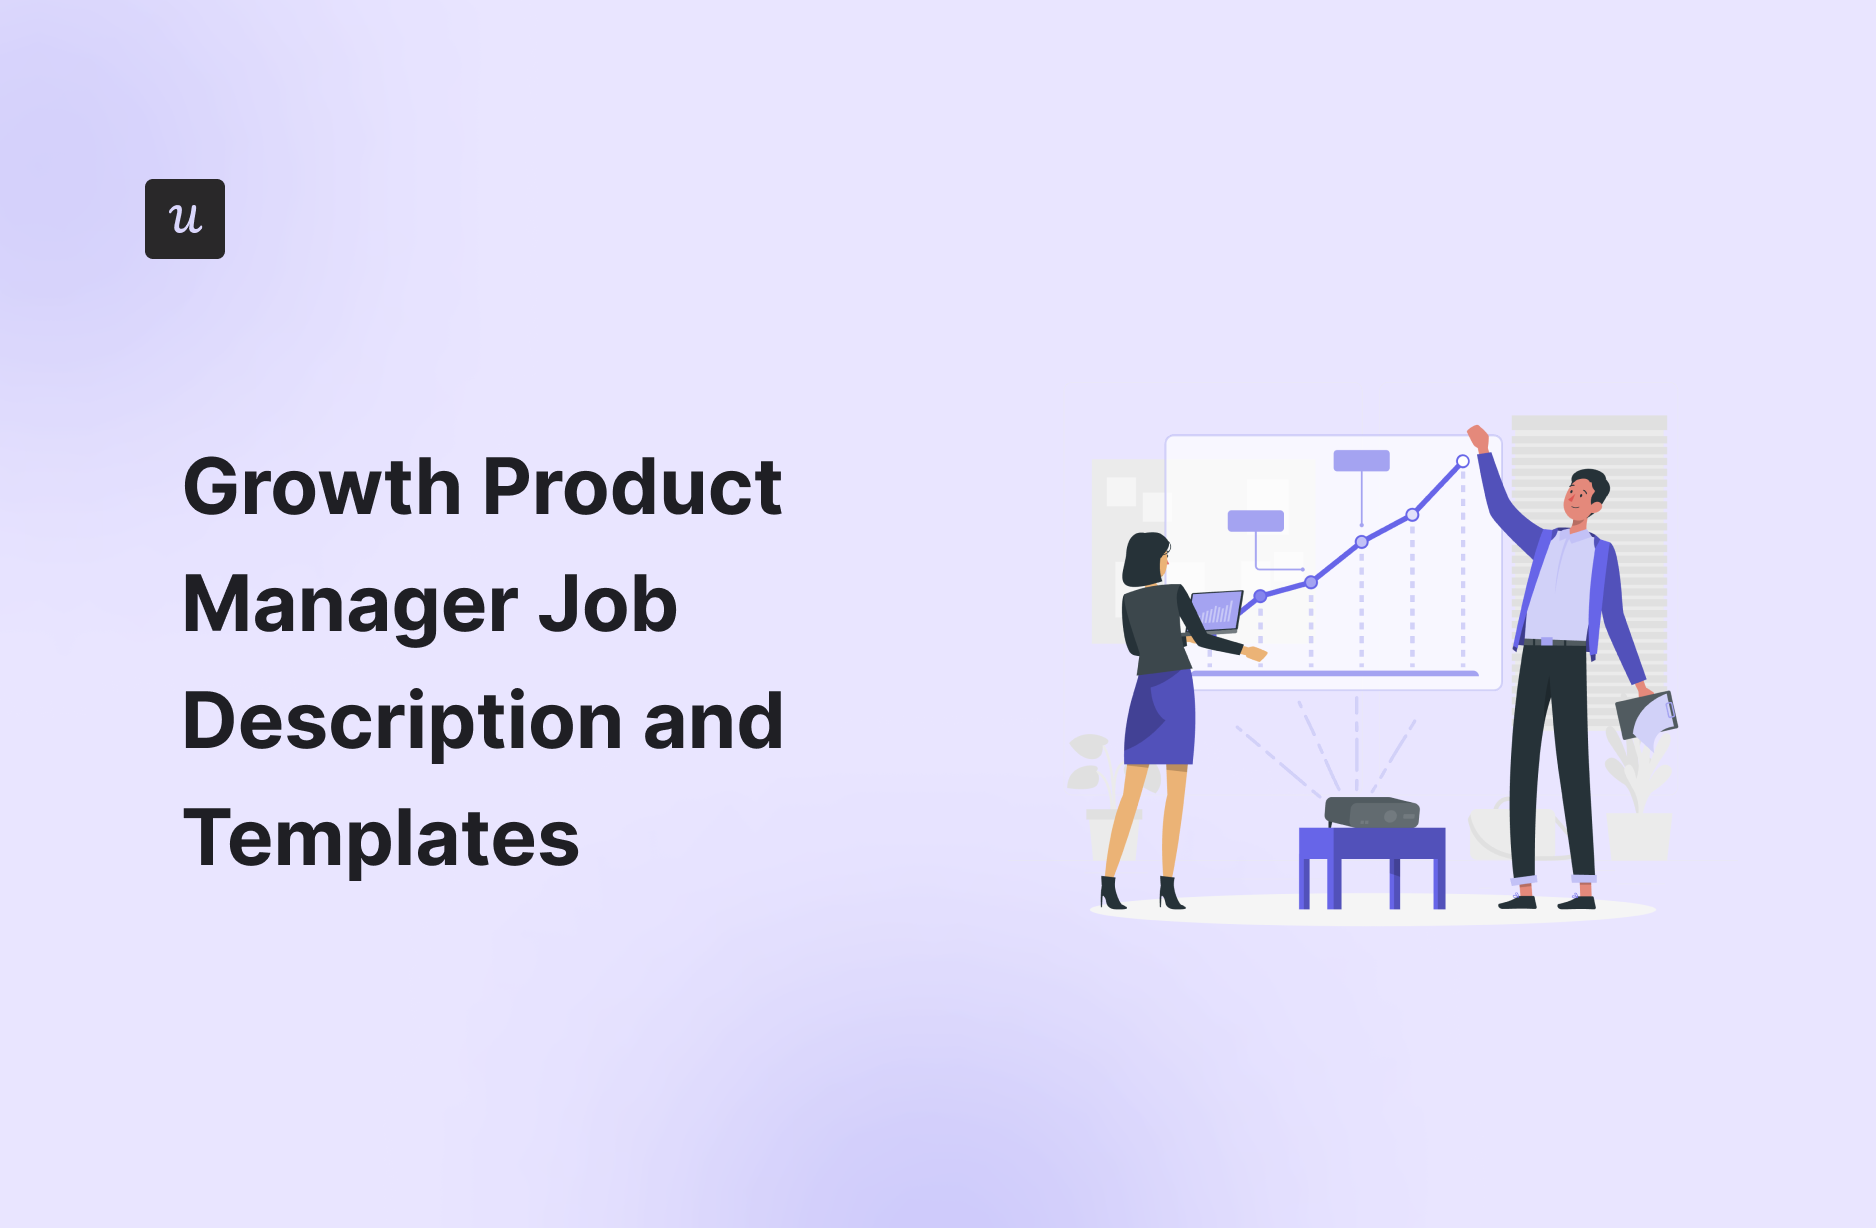 Growth Product Manager Job Description and Templates